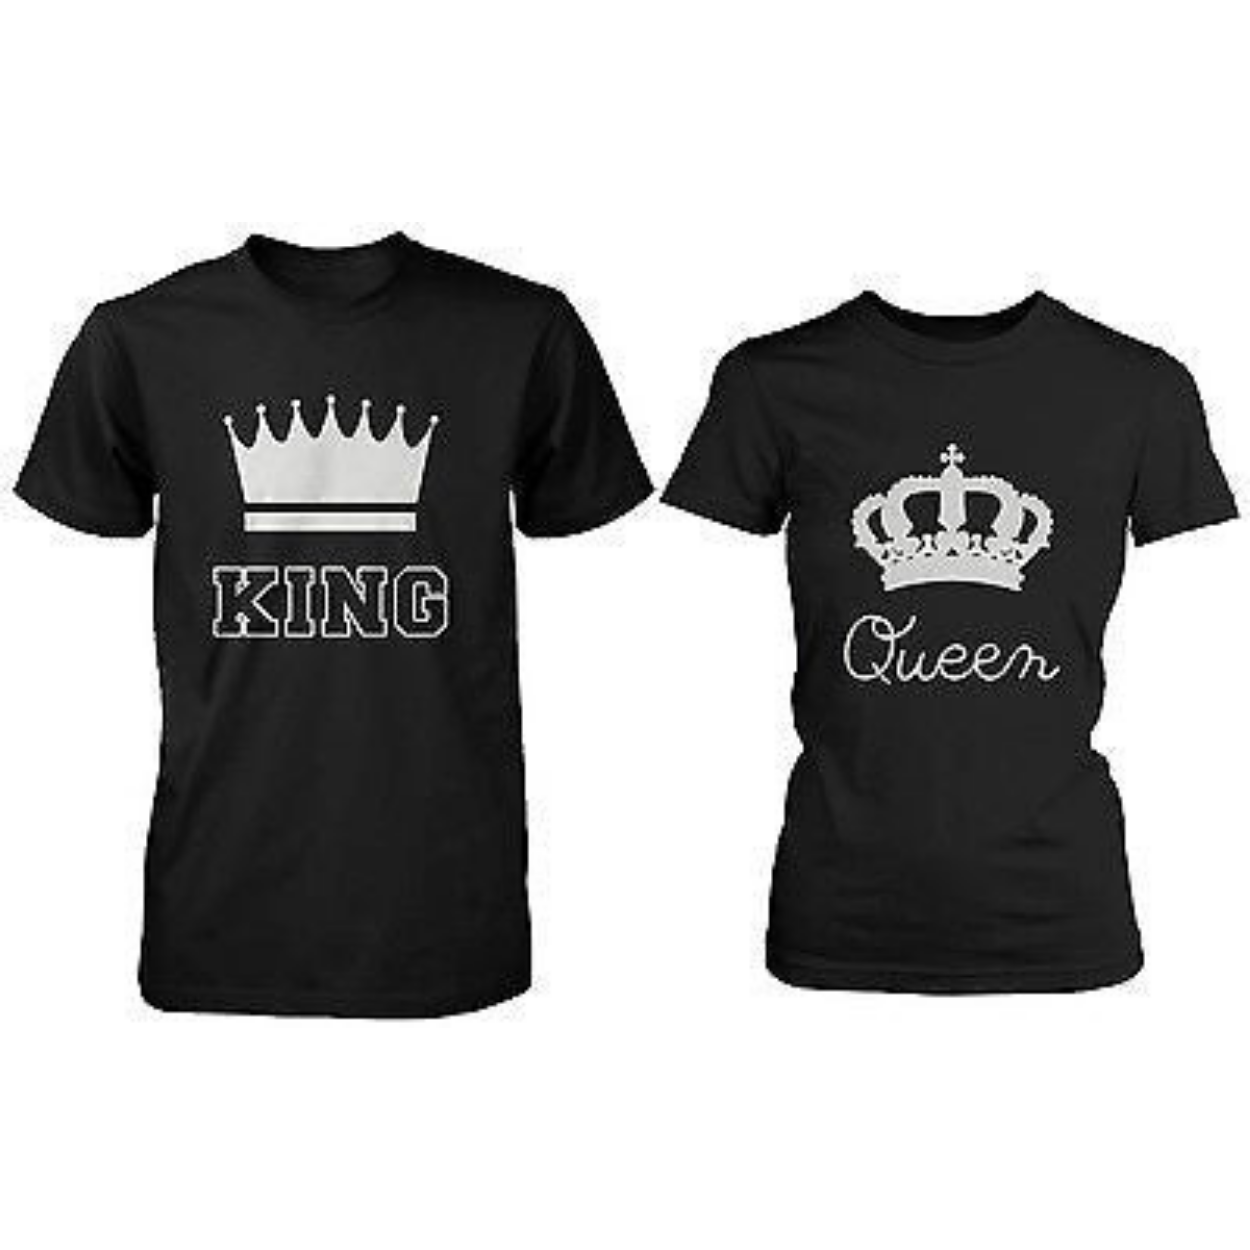 Cute Matching Couple T-Shirts In Black - King And Queen - 100% Cotton - 365 In Love